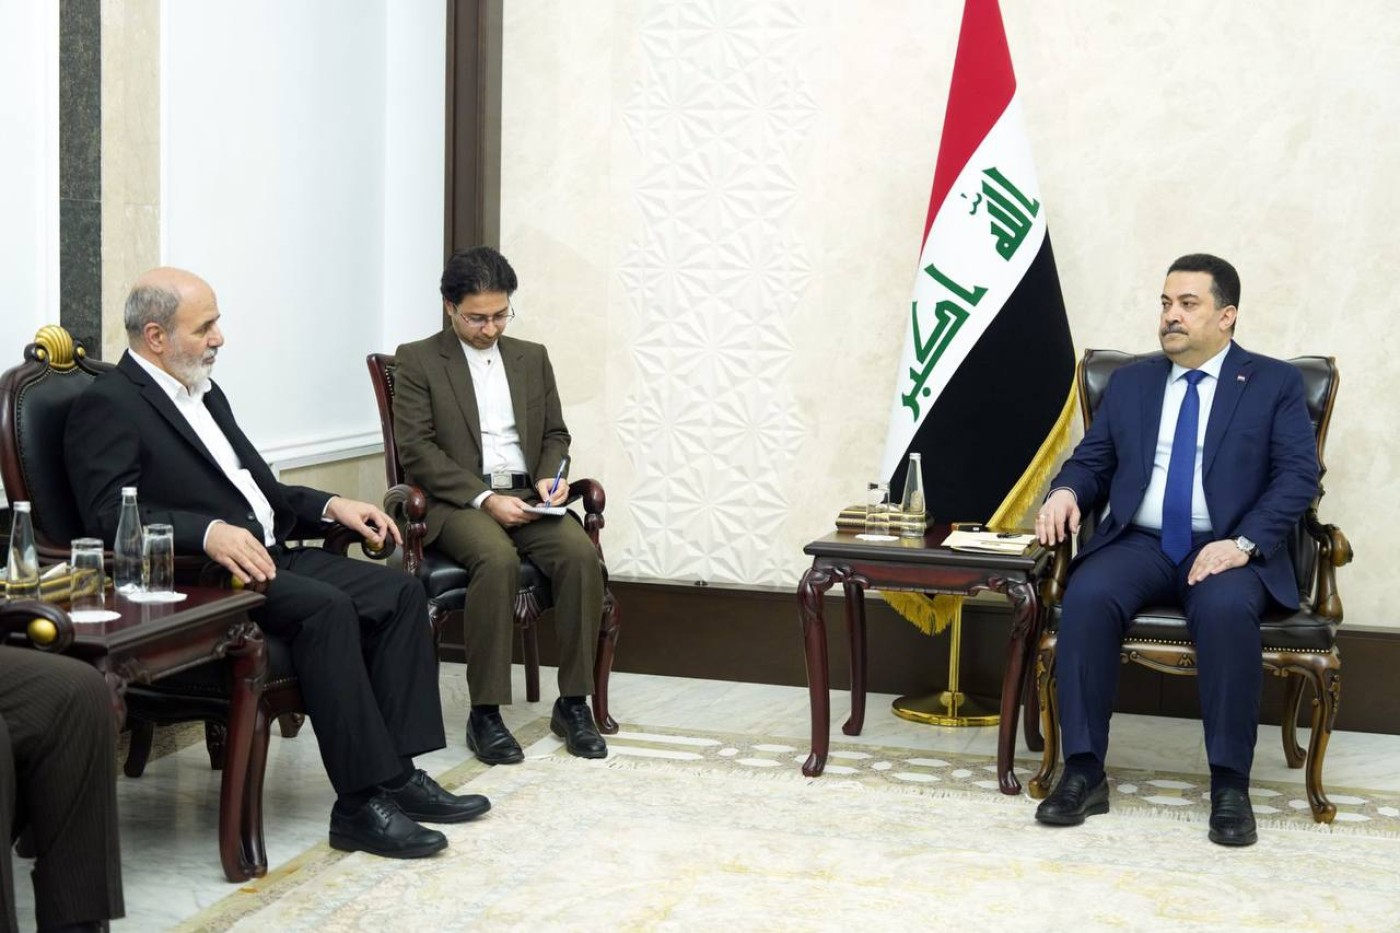 Image of Iraq does not “flatter” anyone at sovereignty expense: Iraqi PM